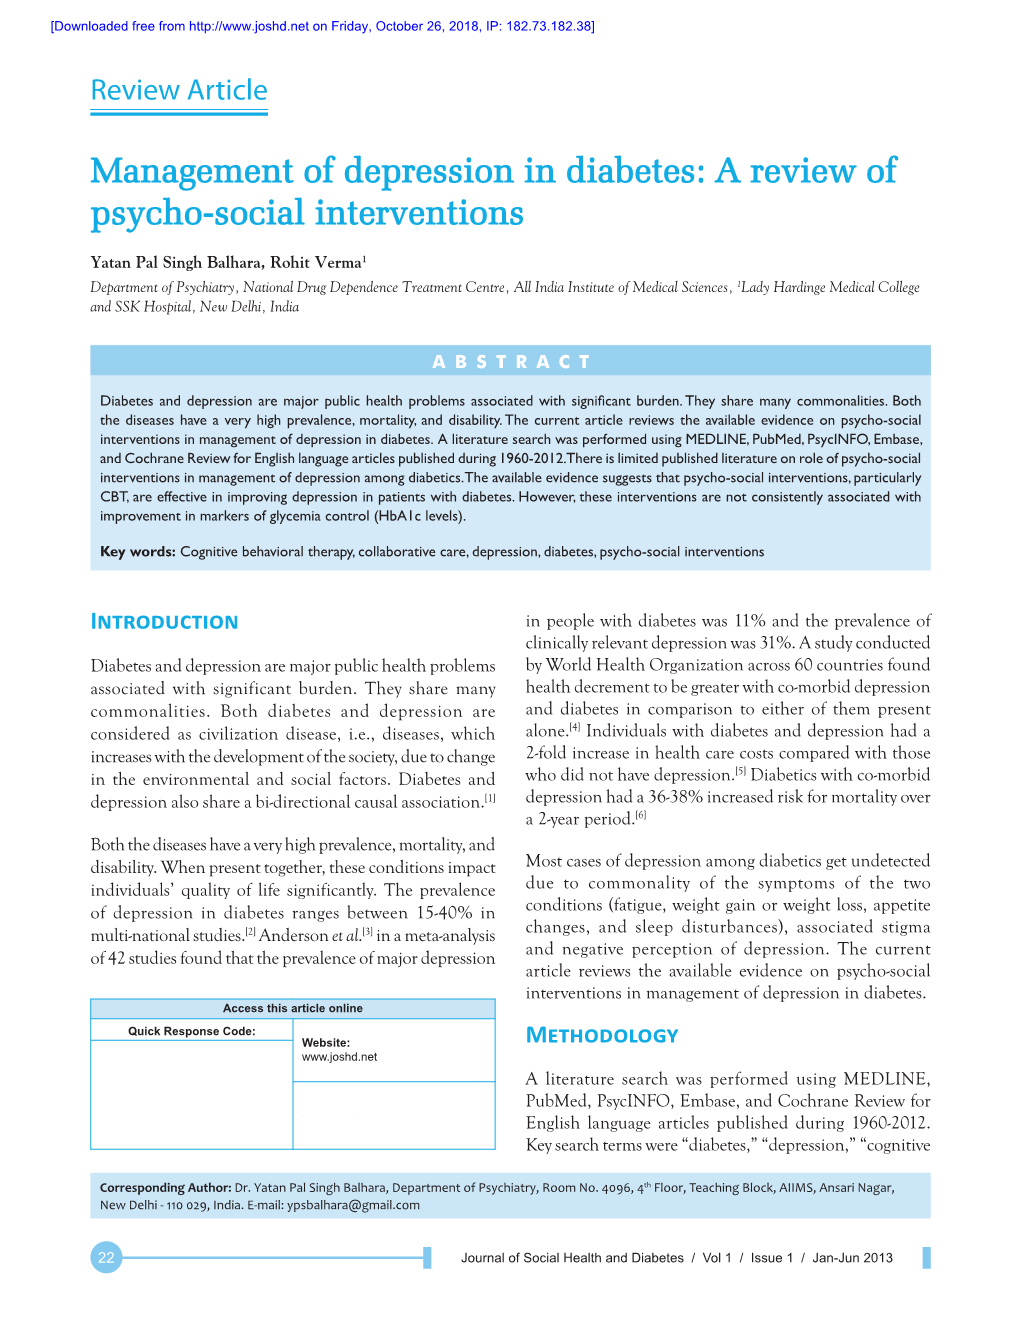 Management of Depression in Diabetes: a Review of Psycho‑Social Interventions